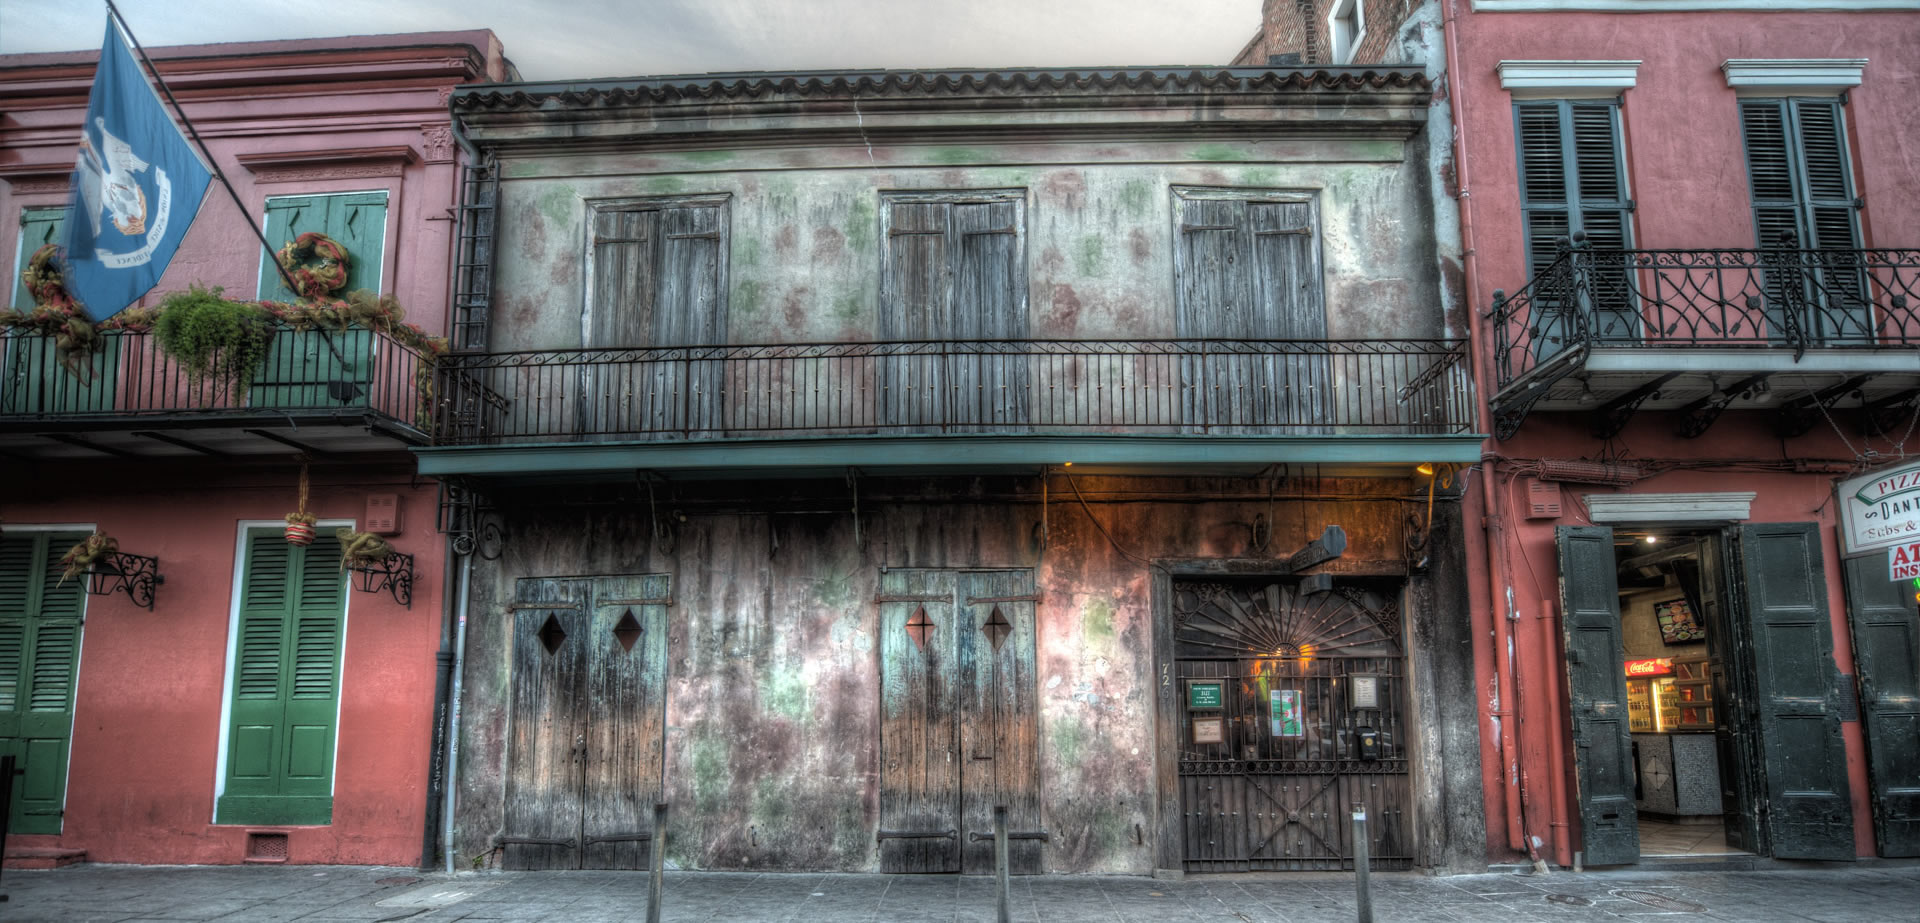 One of the historic sites on our French Quarter History Tour